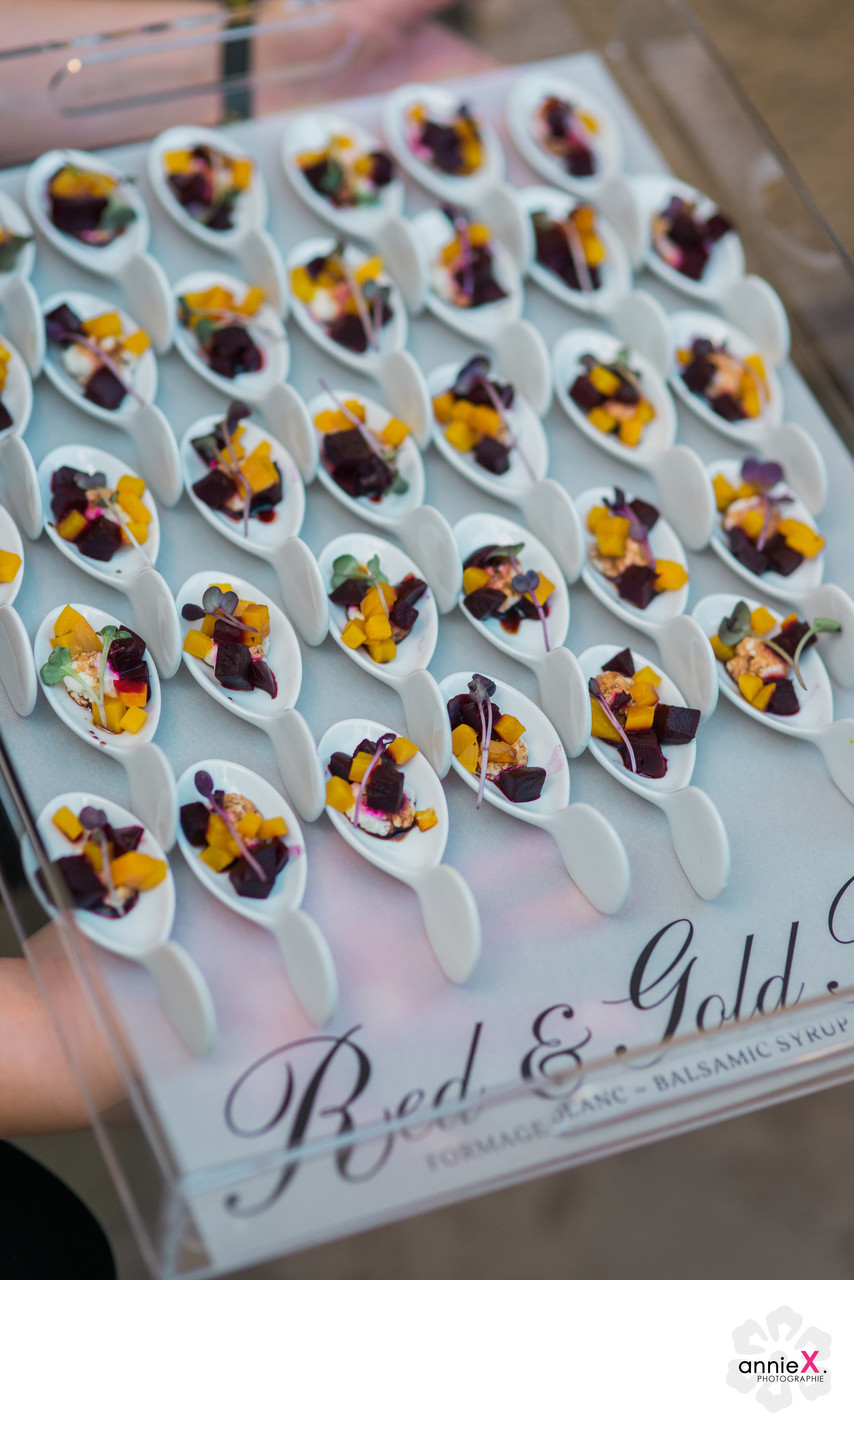 Finger Foods served to guests at private event in Reno